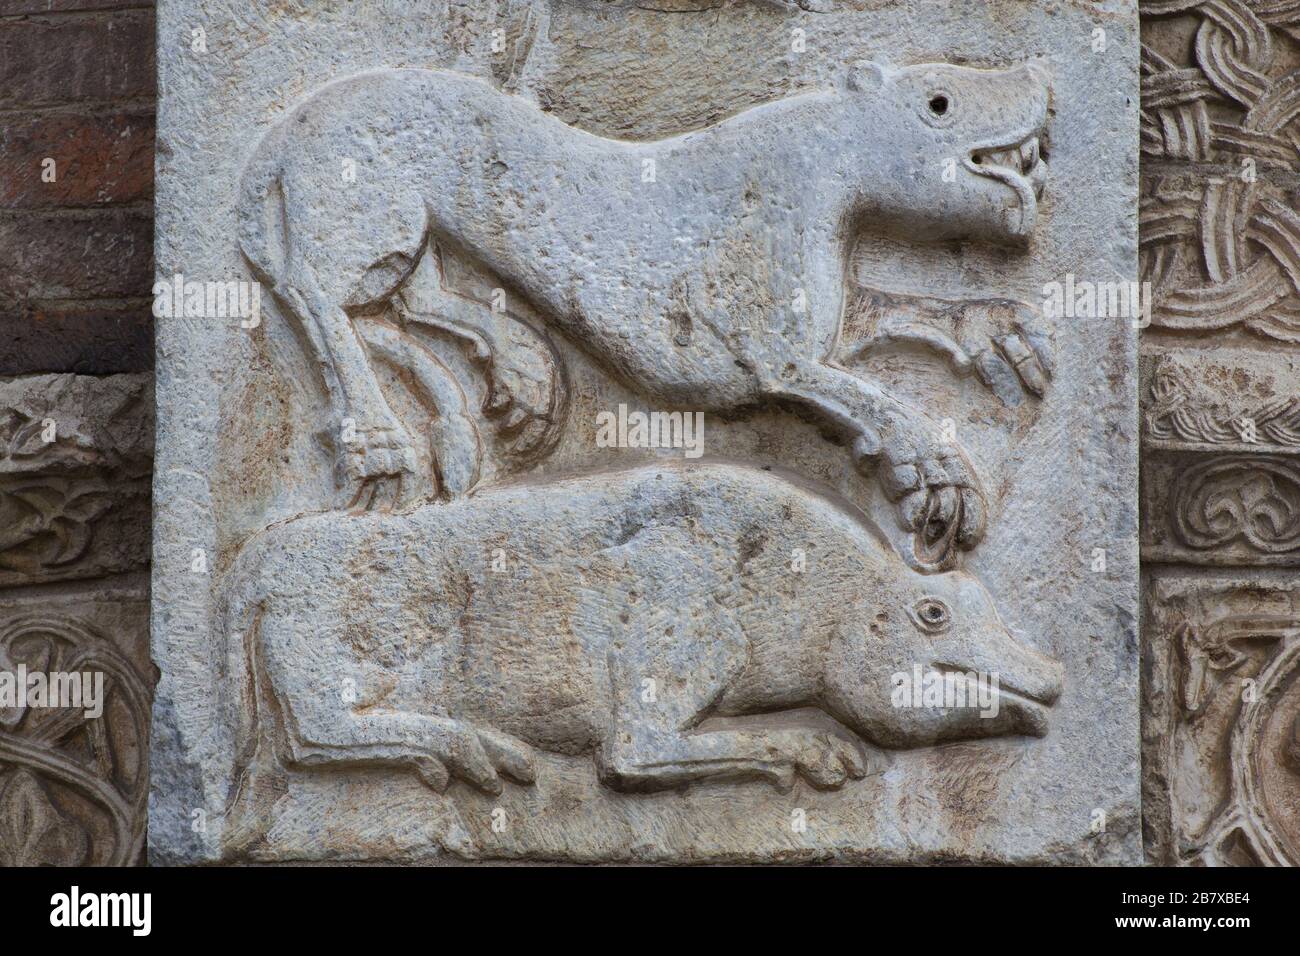 The Medieval Bestiary - Lion and Wild Pig - romanesque bas-relief - - Atrium of Ansperto - Basilica of Sant'Ambrogio - Milan Stock Photo